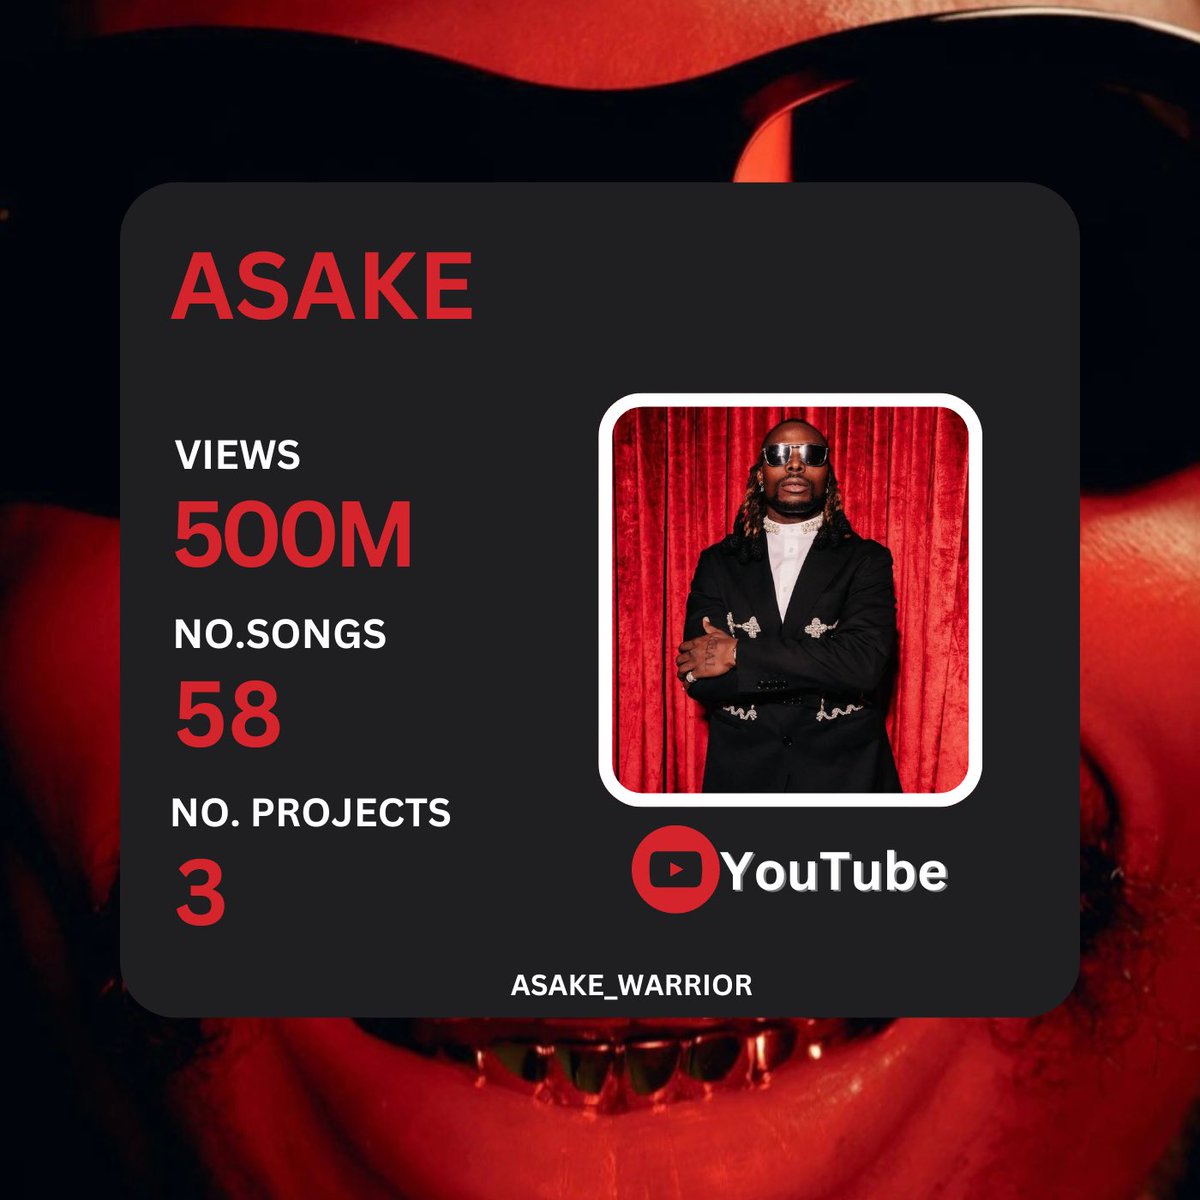 🚨 @asakemusik has amassed over 500M career views on YouTube 🔥📿 

-Asake has now amassed at least over 500M streams across major streaming platforms (Apple Music, Spotify, Boomplay, Audiomack & YouTube)